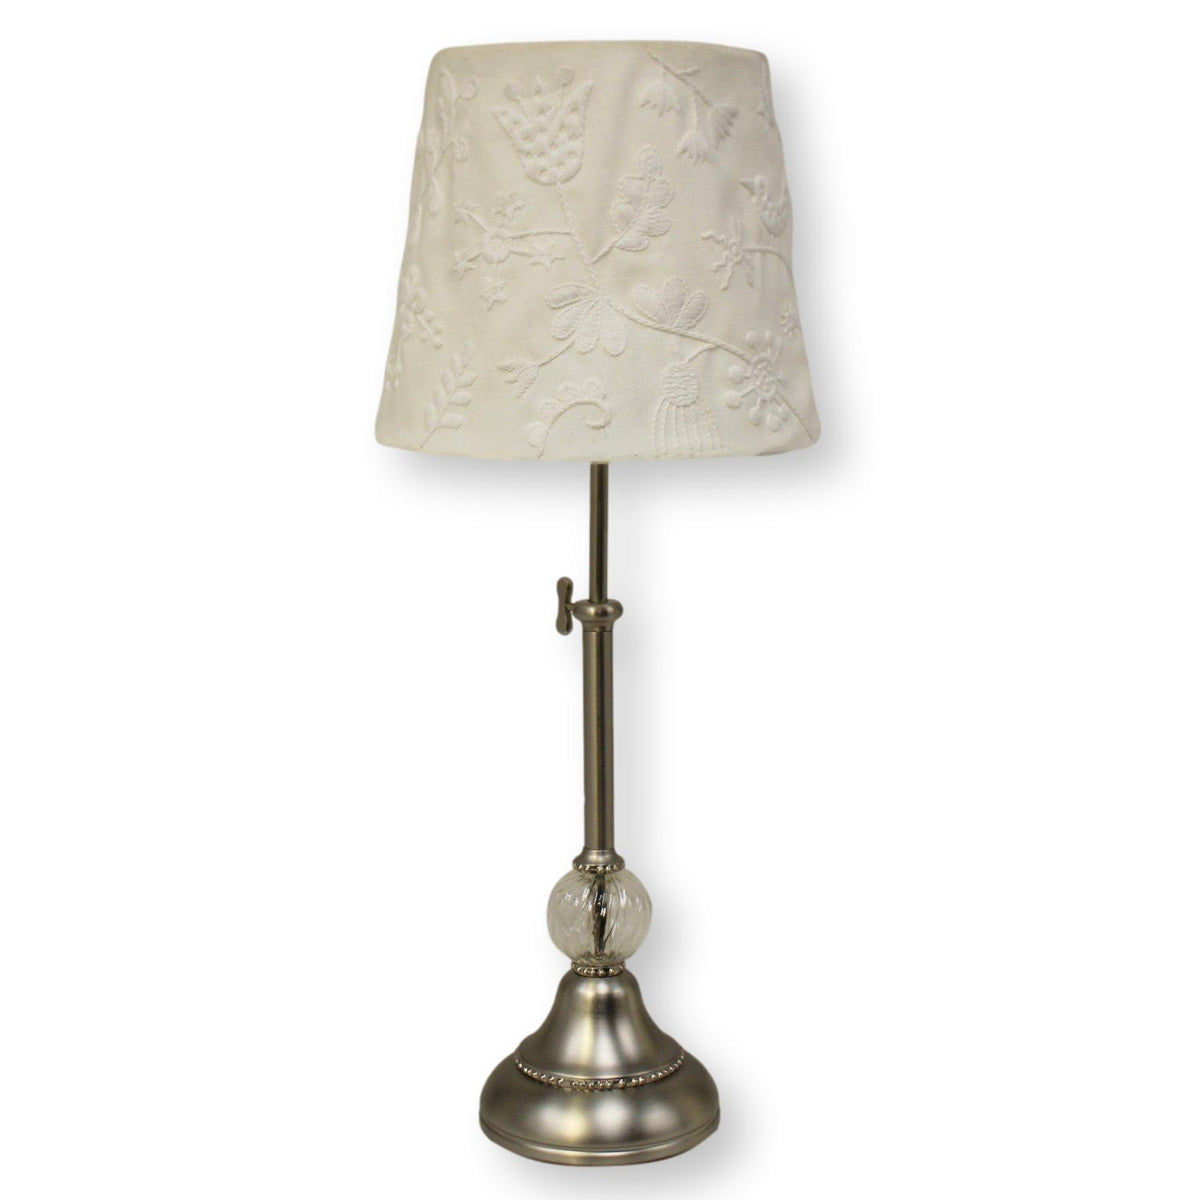 Glass Finial Adjustable Height Table Lamp